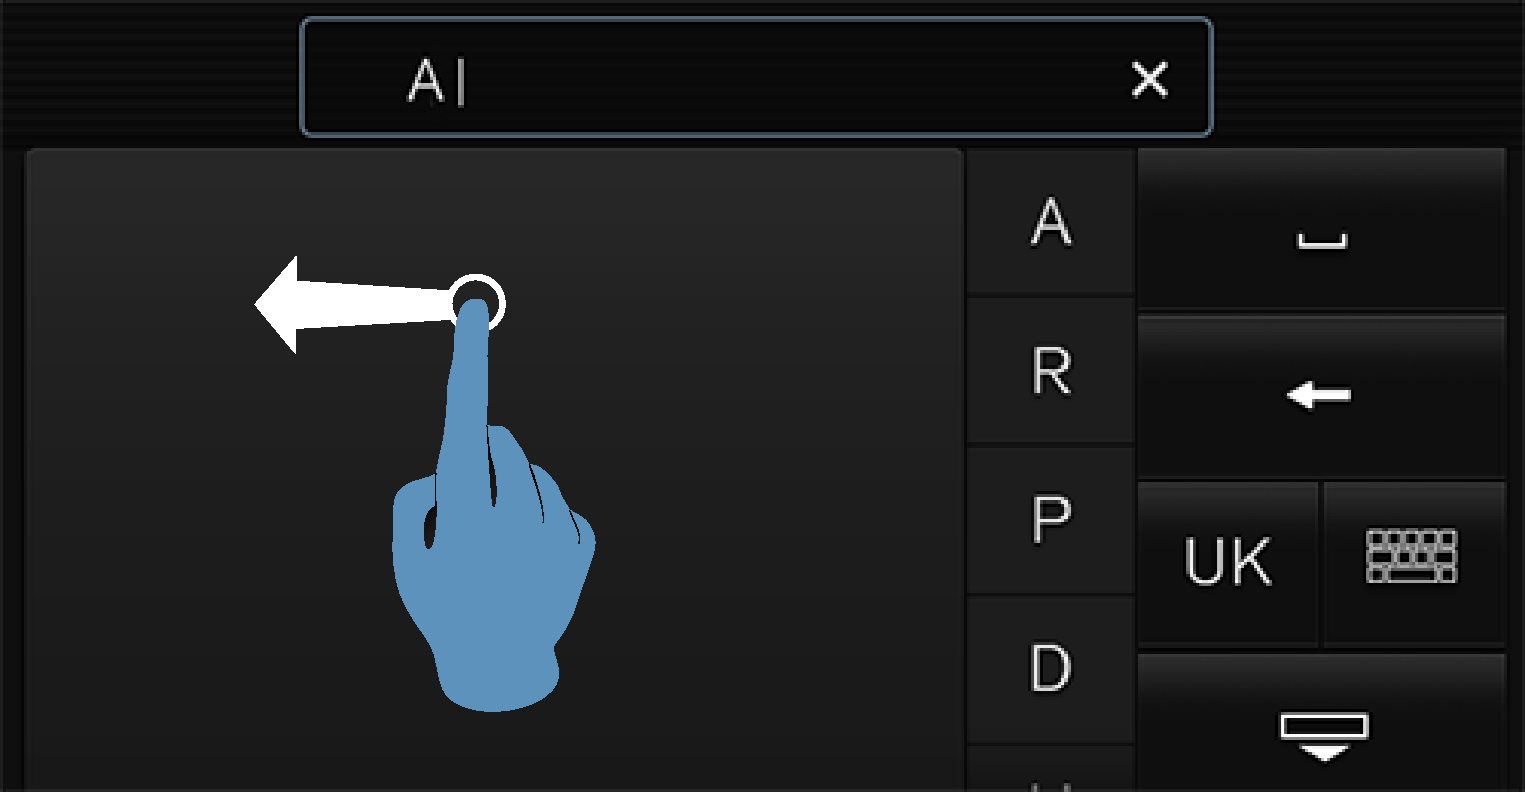 Delete all characters in the text field (2) by swiping across the handwriting field (1).